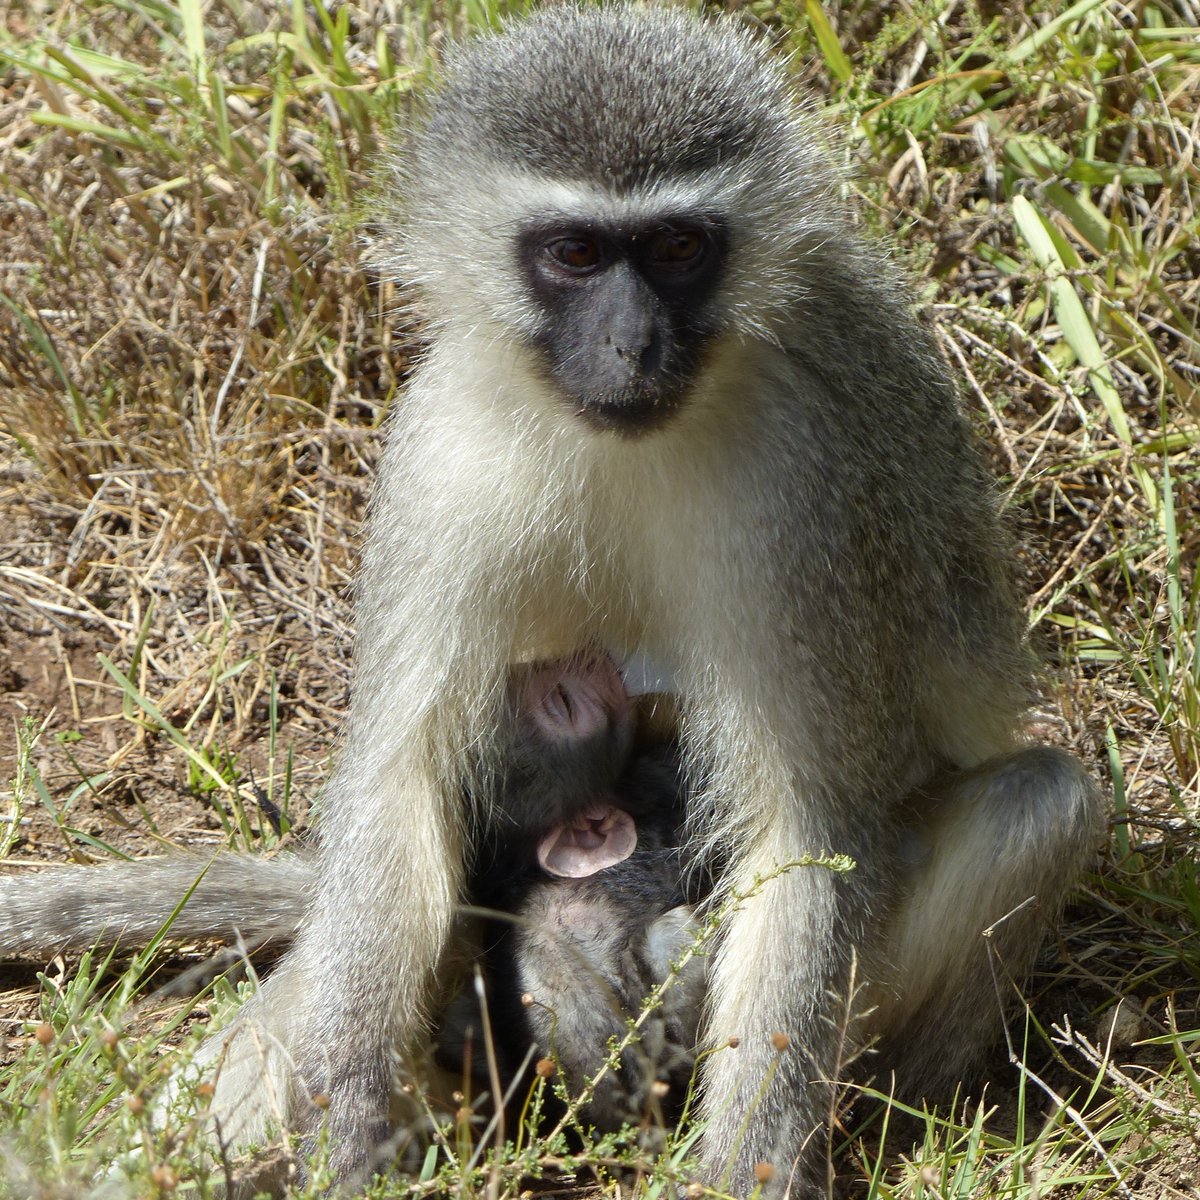 New paper out with @evo_NTU group members @drchrisyoung1 and @rich_mcfarland and colleagues in @FunEcology Mother–offspring conflict and body temperature regulation during gestation and lactation in a wild primate - open access so go have a read! besjournals.onlinelibrary.wiley.com/doi/10.1111/13…